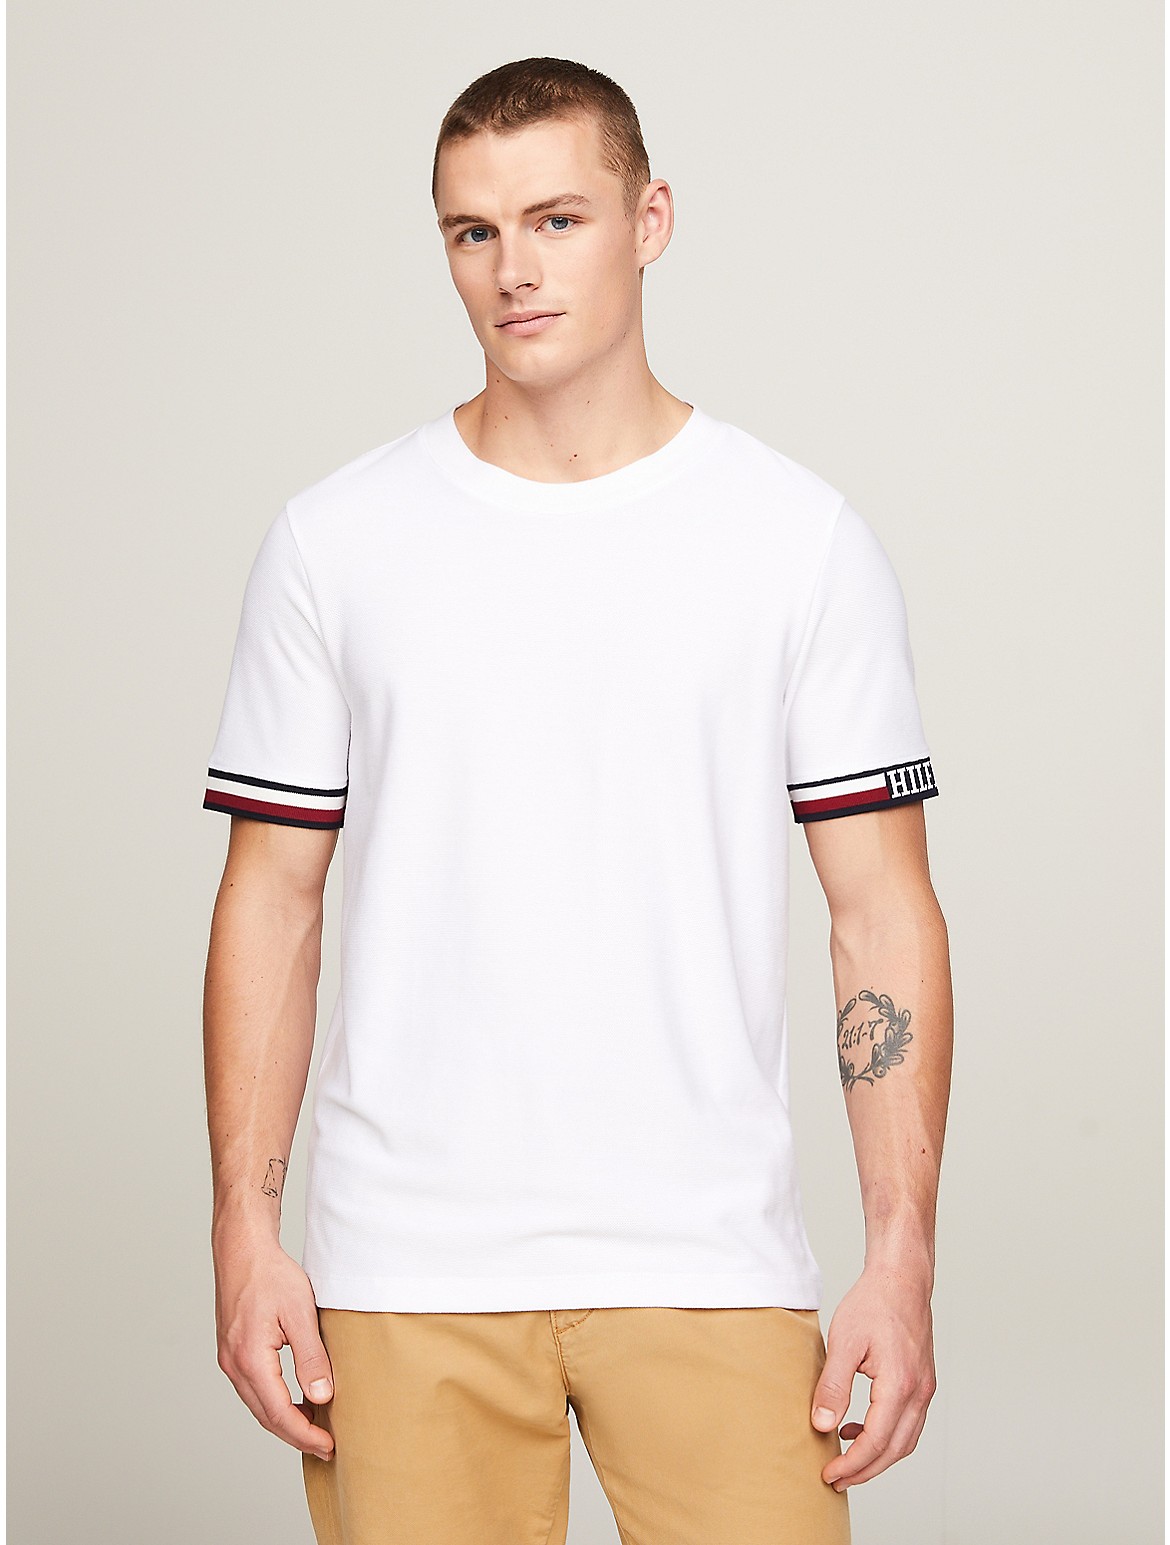 Tommy Hilfiger Men's Monotype Stripe Tipped T-Shirt